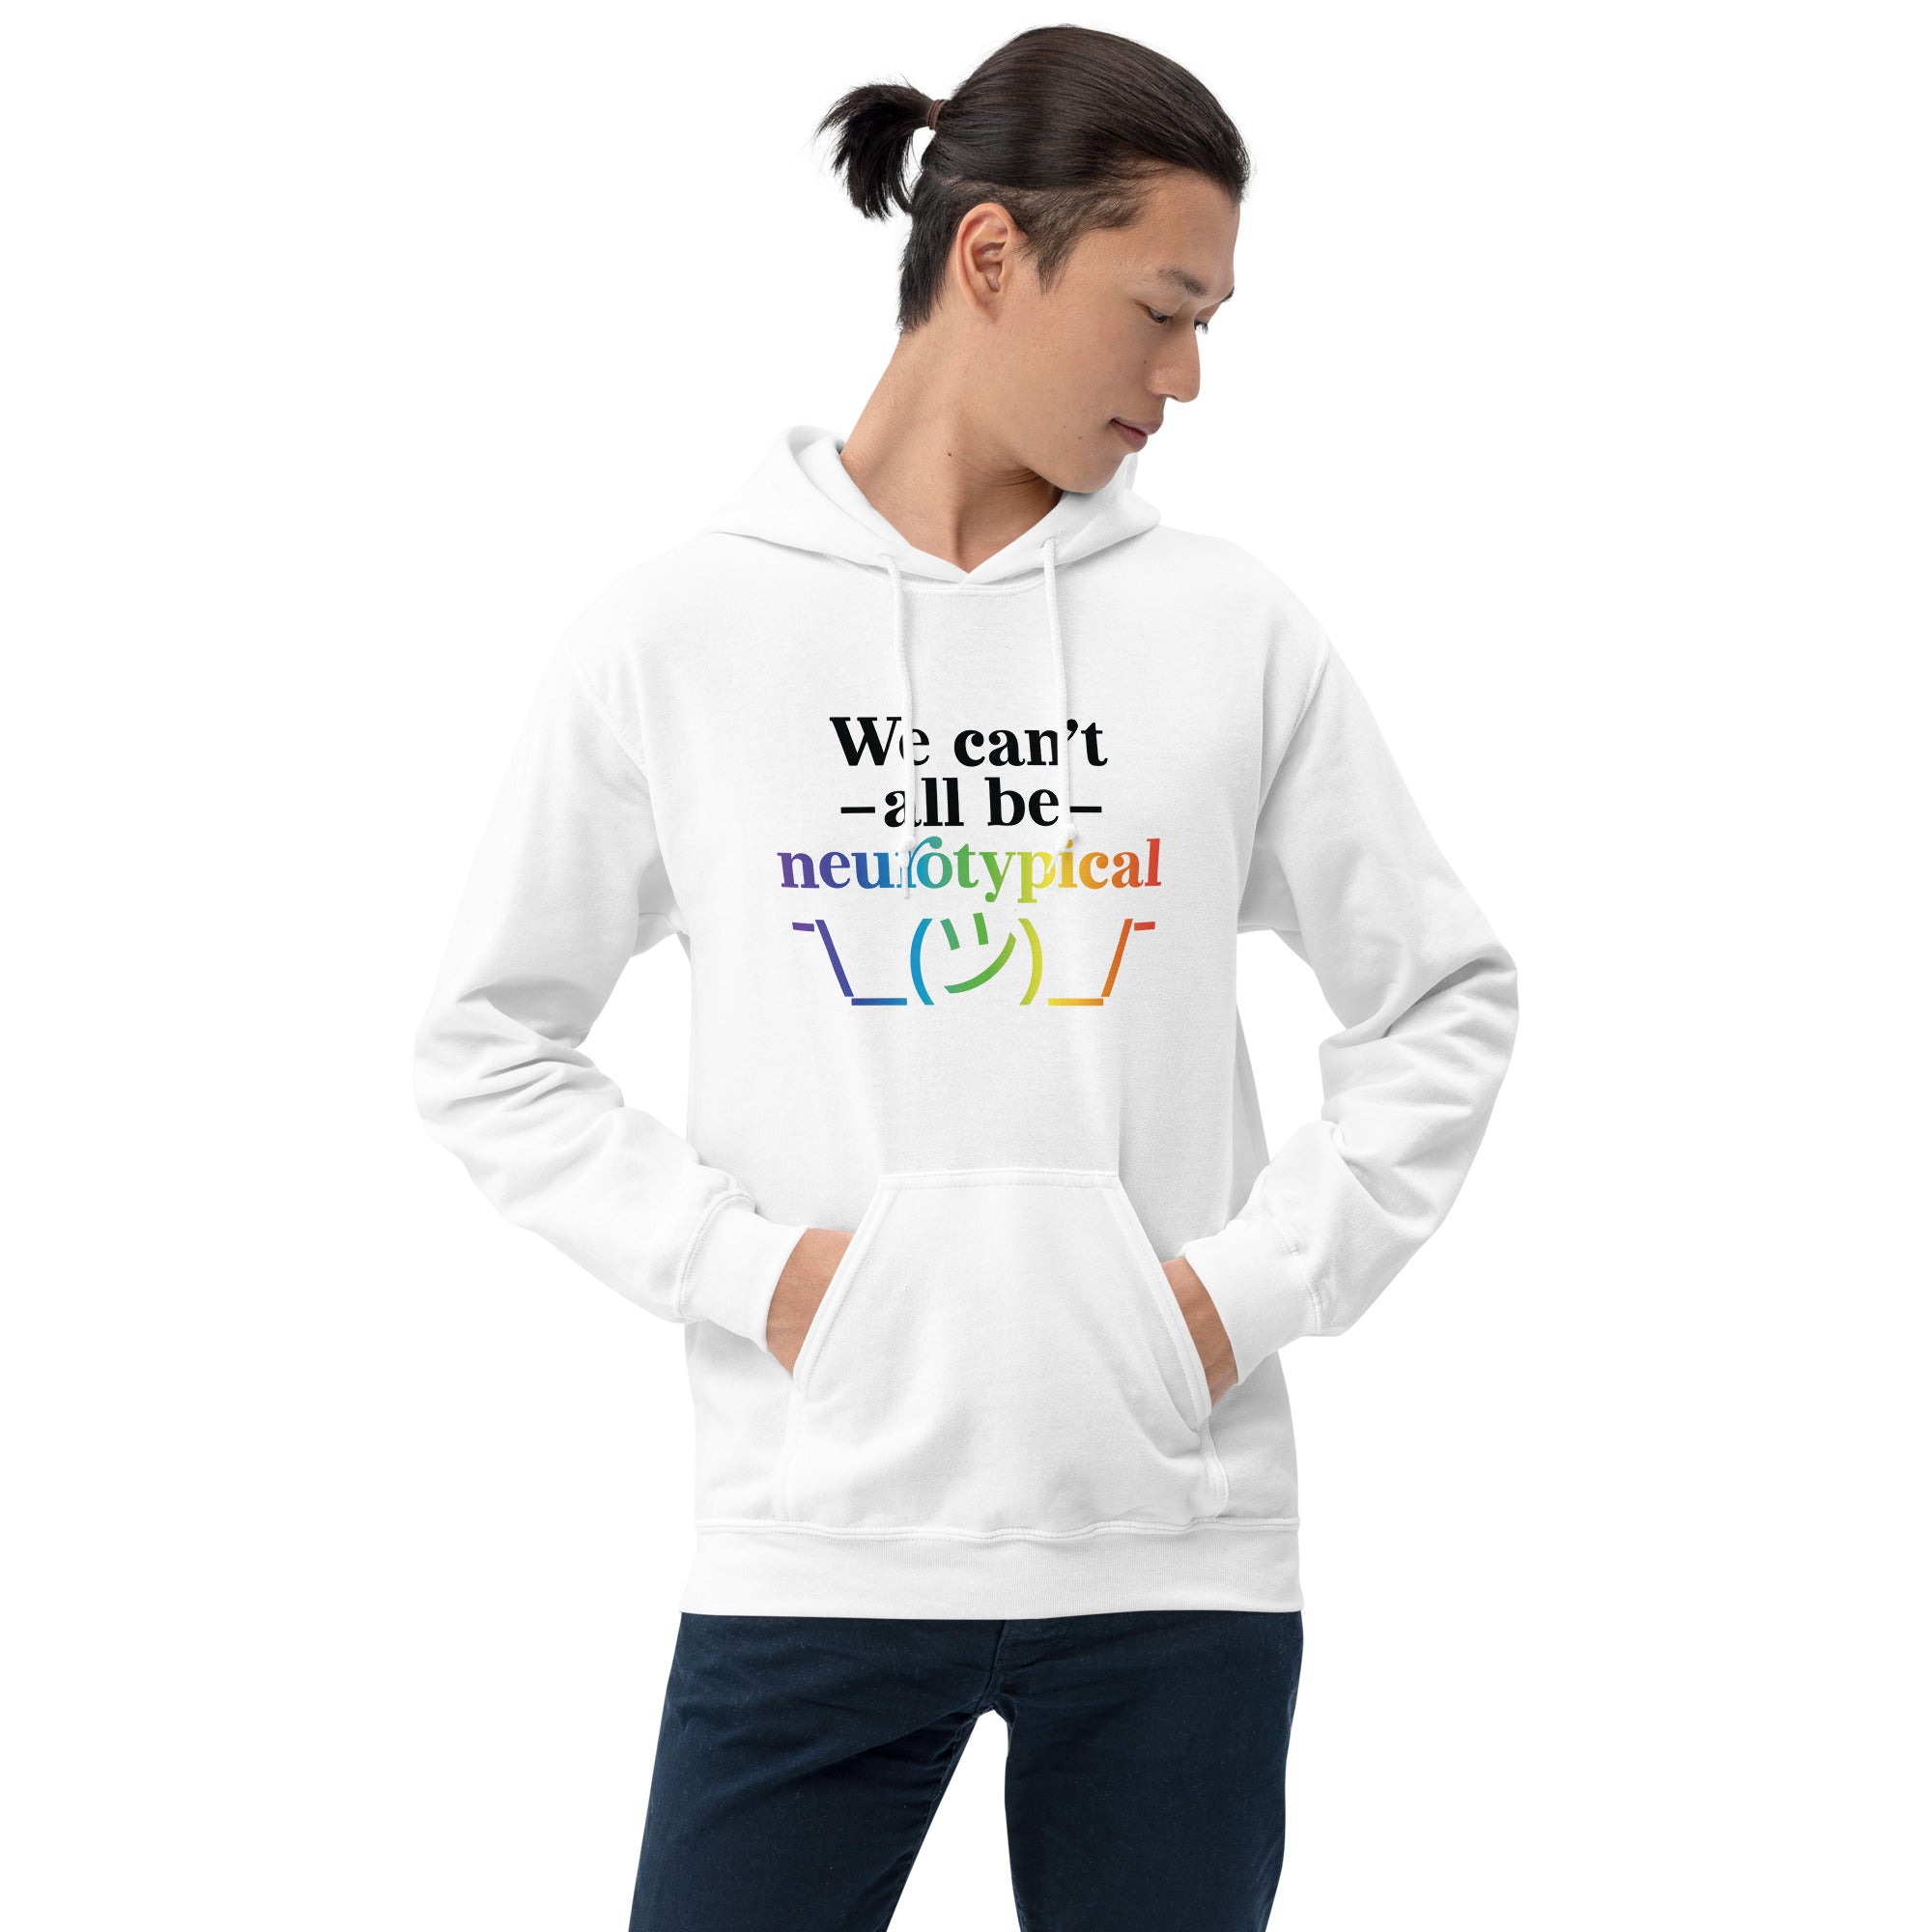 Unisex Hoodie- ADHD- We Can tAll Be Neurotypical